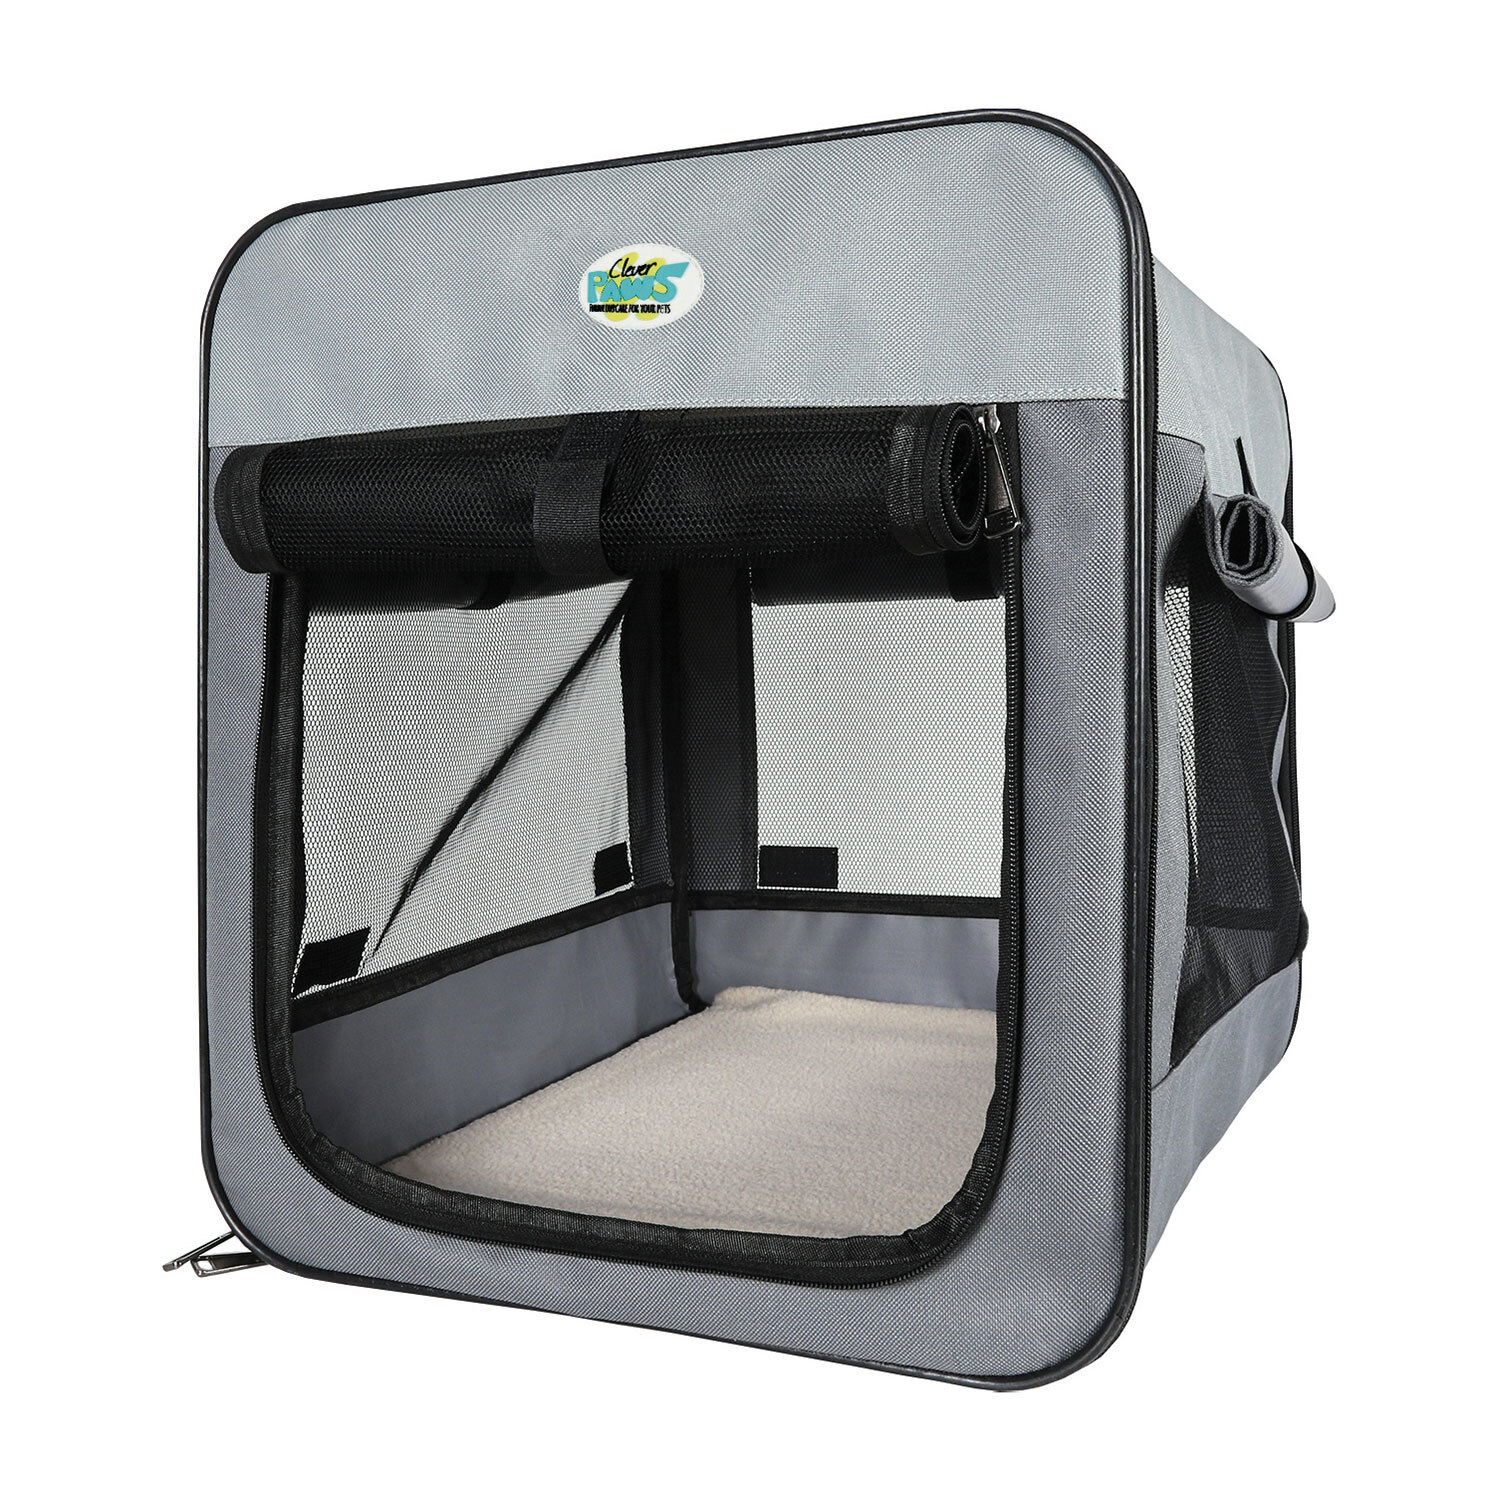 Clever Paws Medium Soft Pet Kennel Image 2